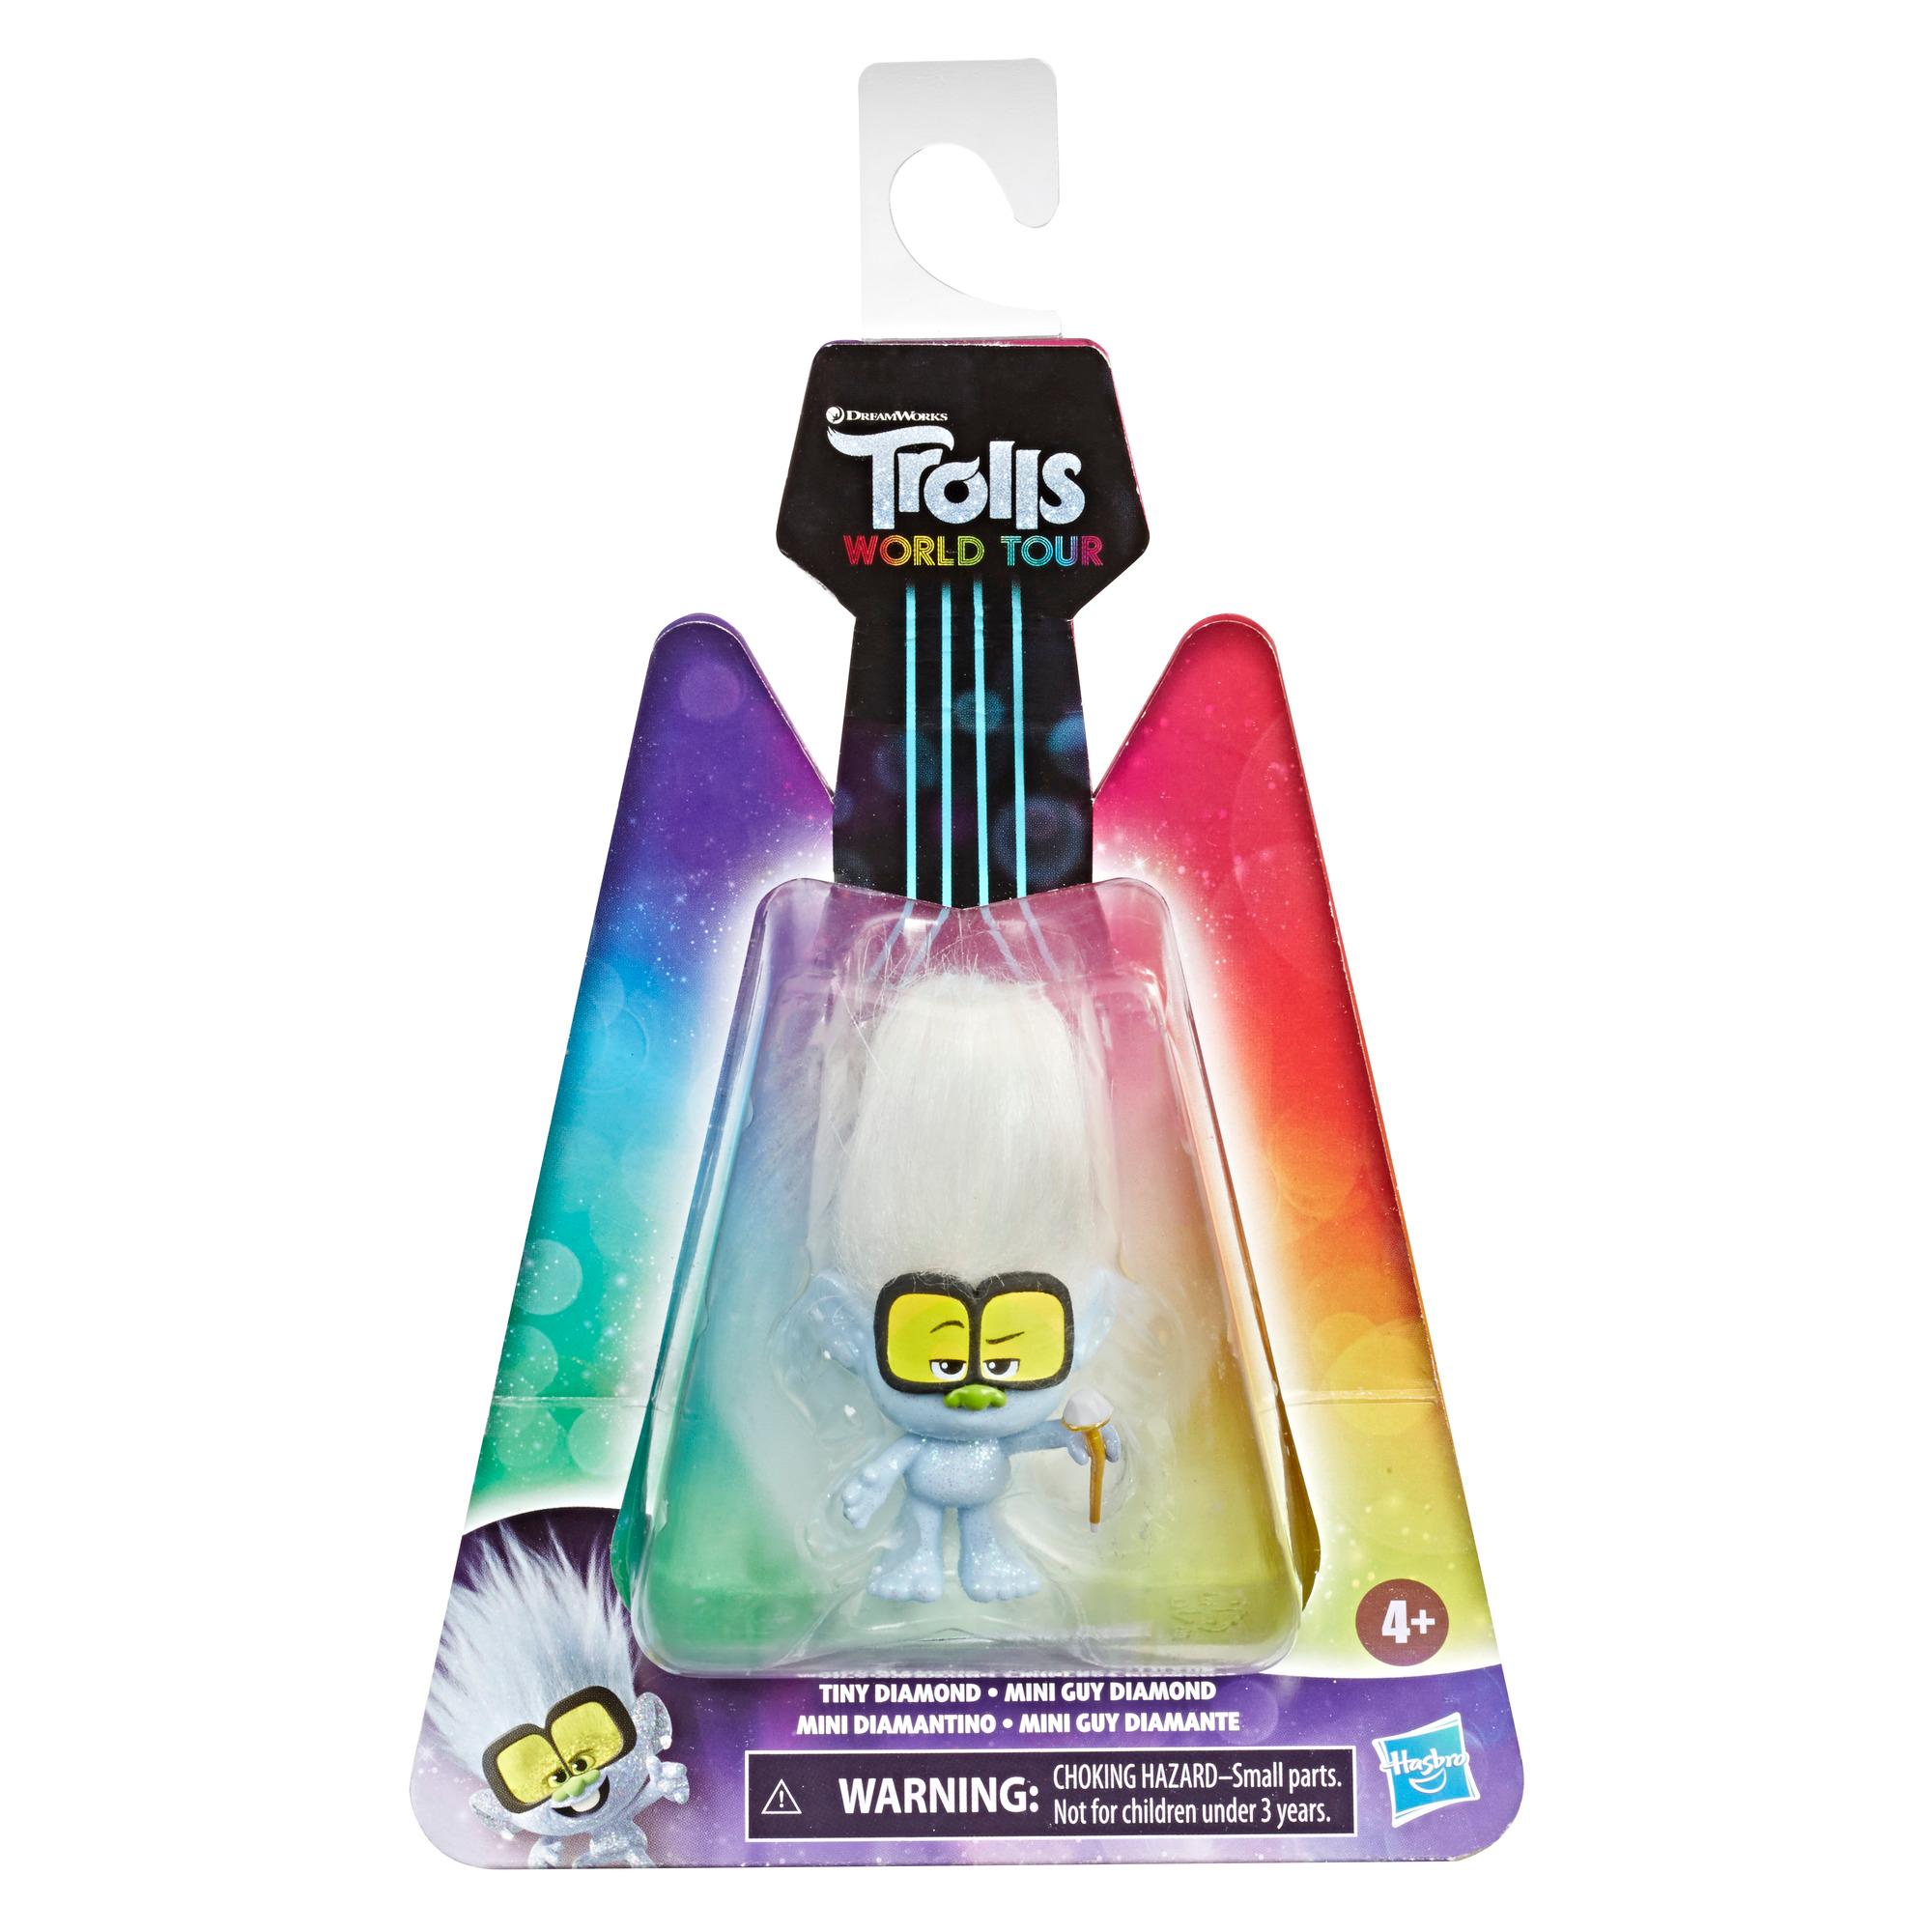 DreamWorks Trolls World Tour Tiny Diamond, Doll Figure with Scepter Accessory, Toy Inspired by the Movie Trolls World Tour